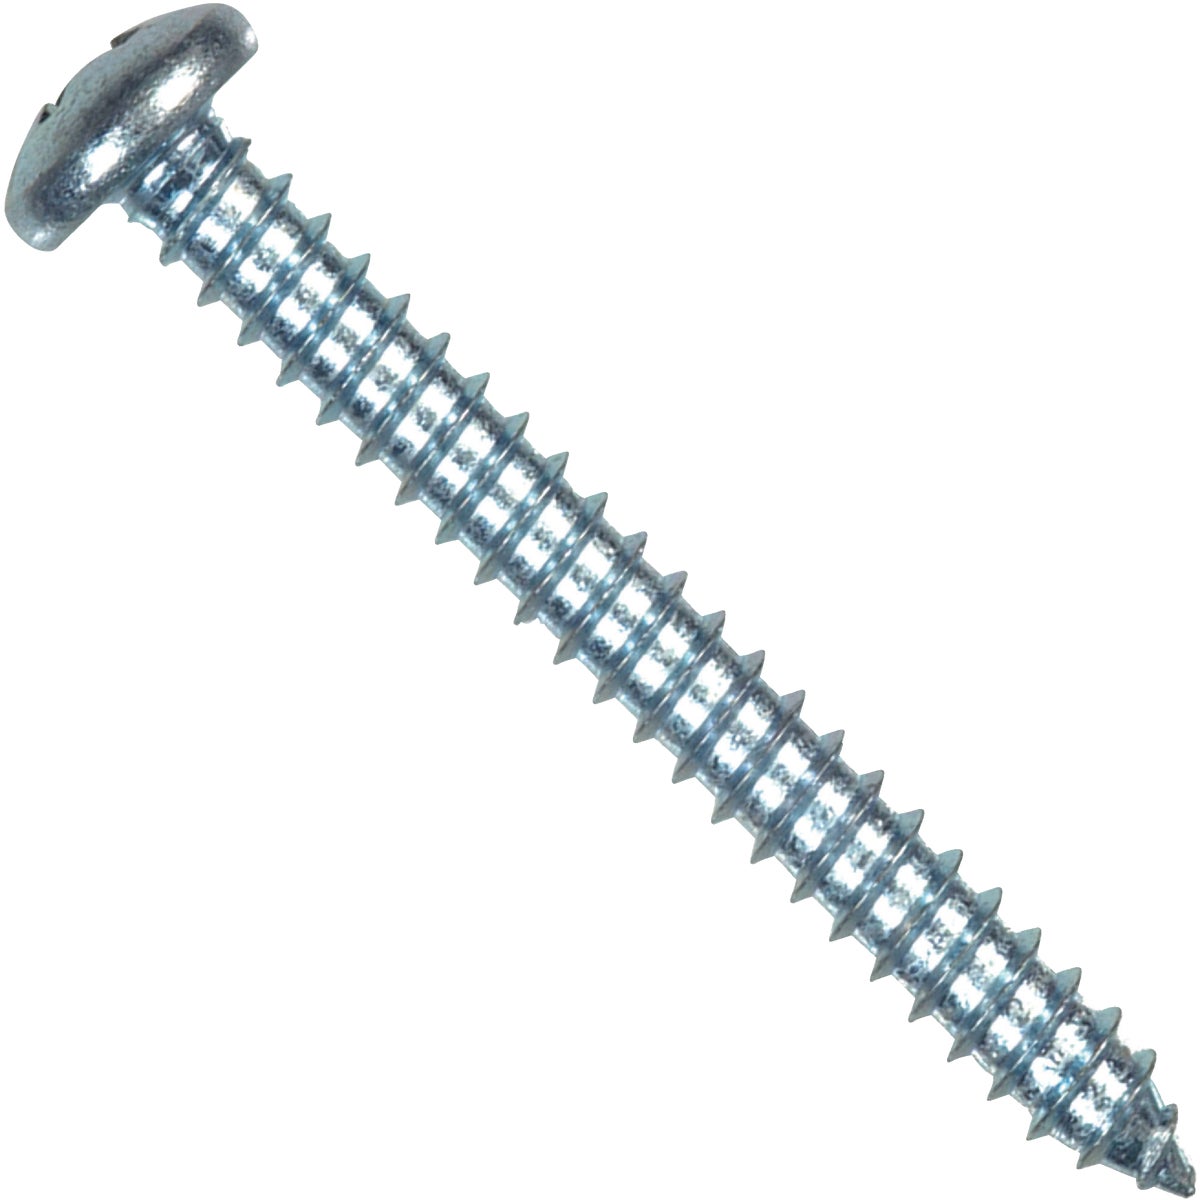 Item 721034, Pan head Phillips sheet metal screws are designed to attach metal to metal